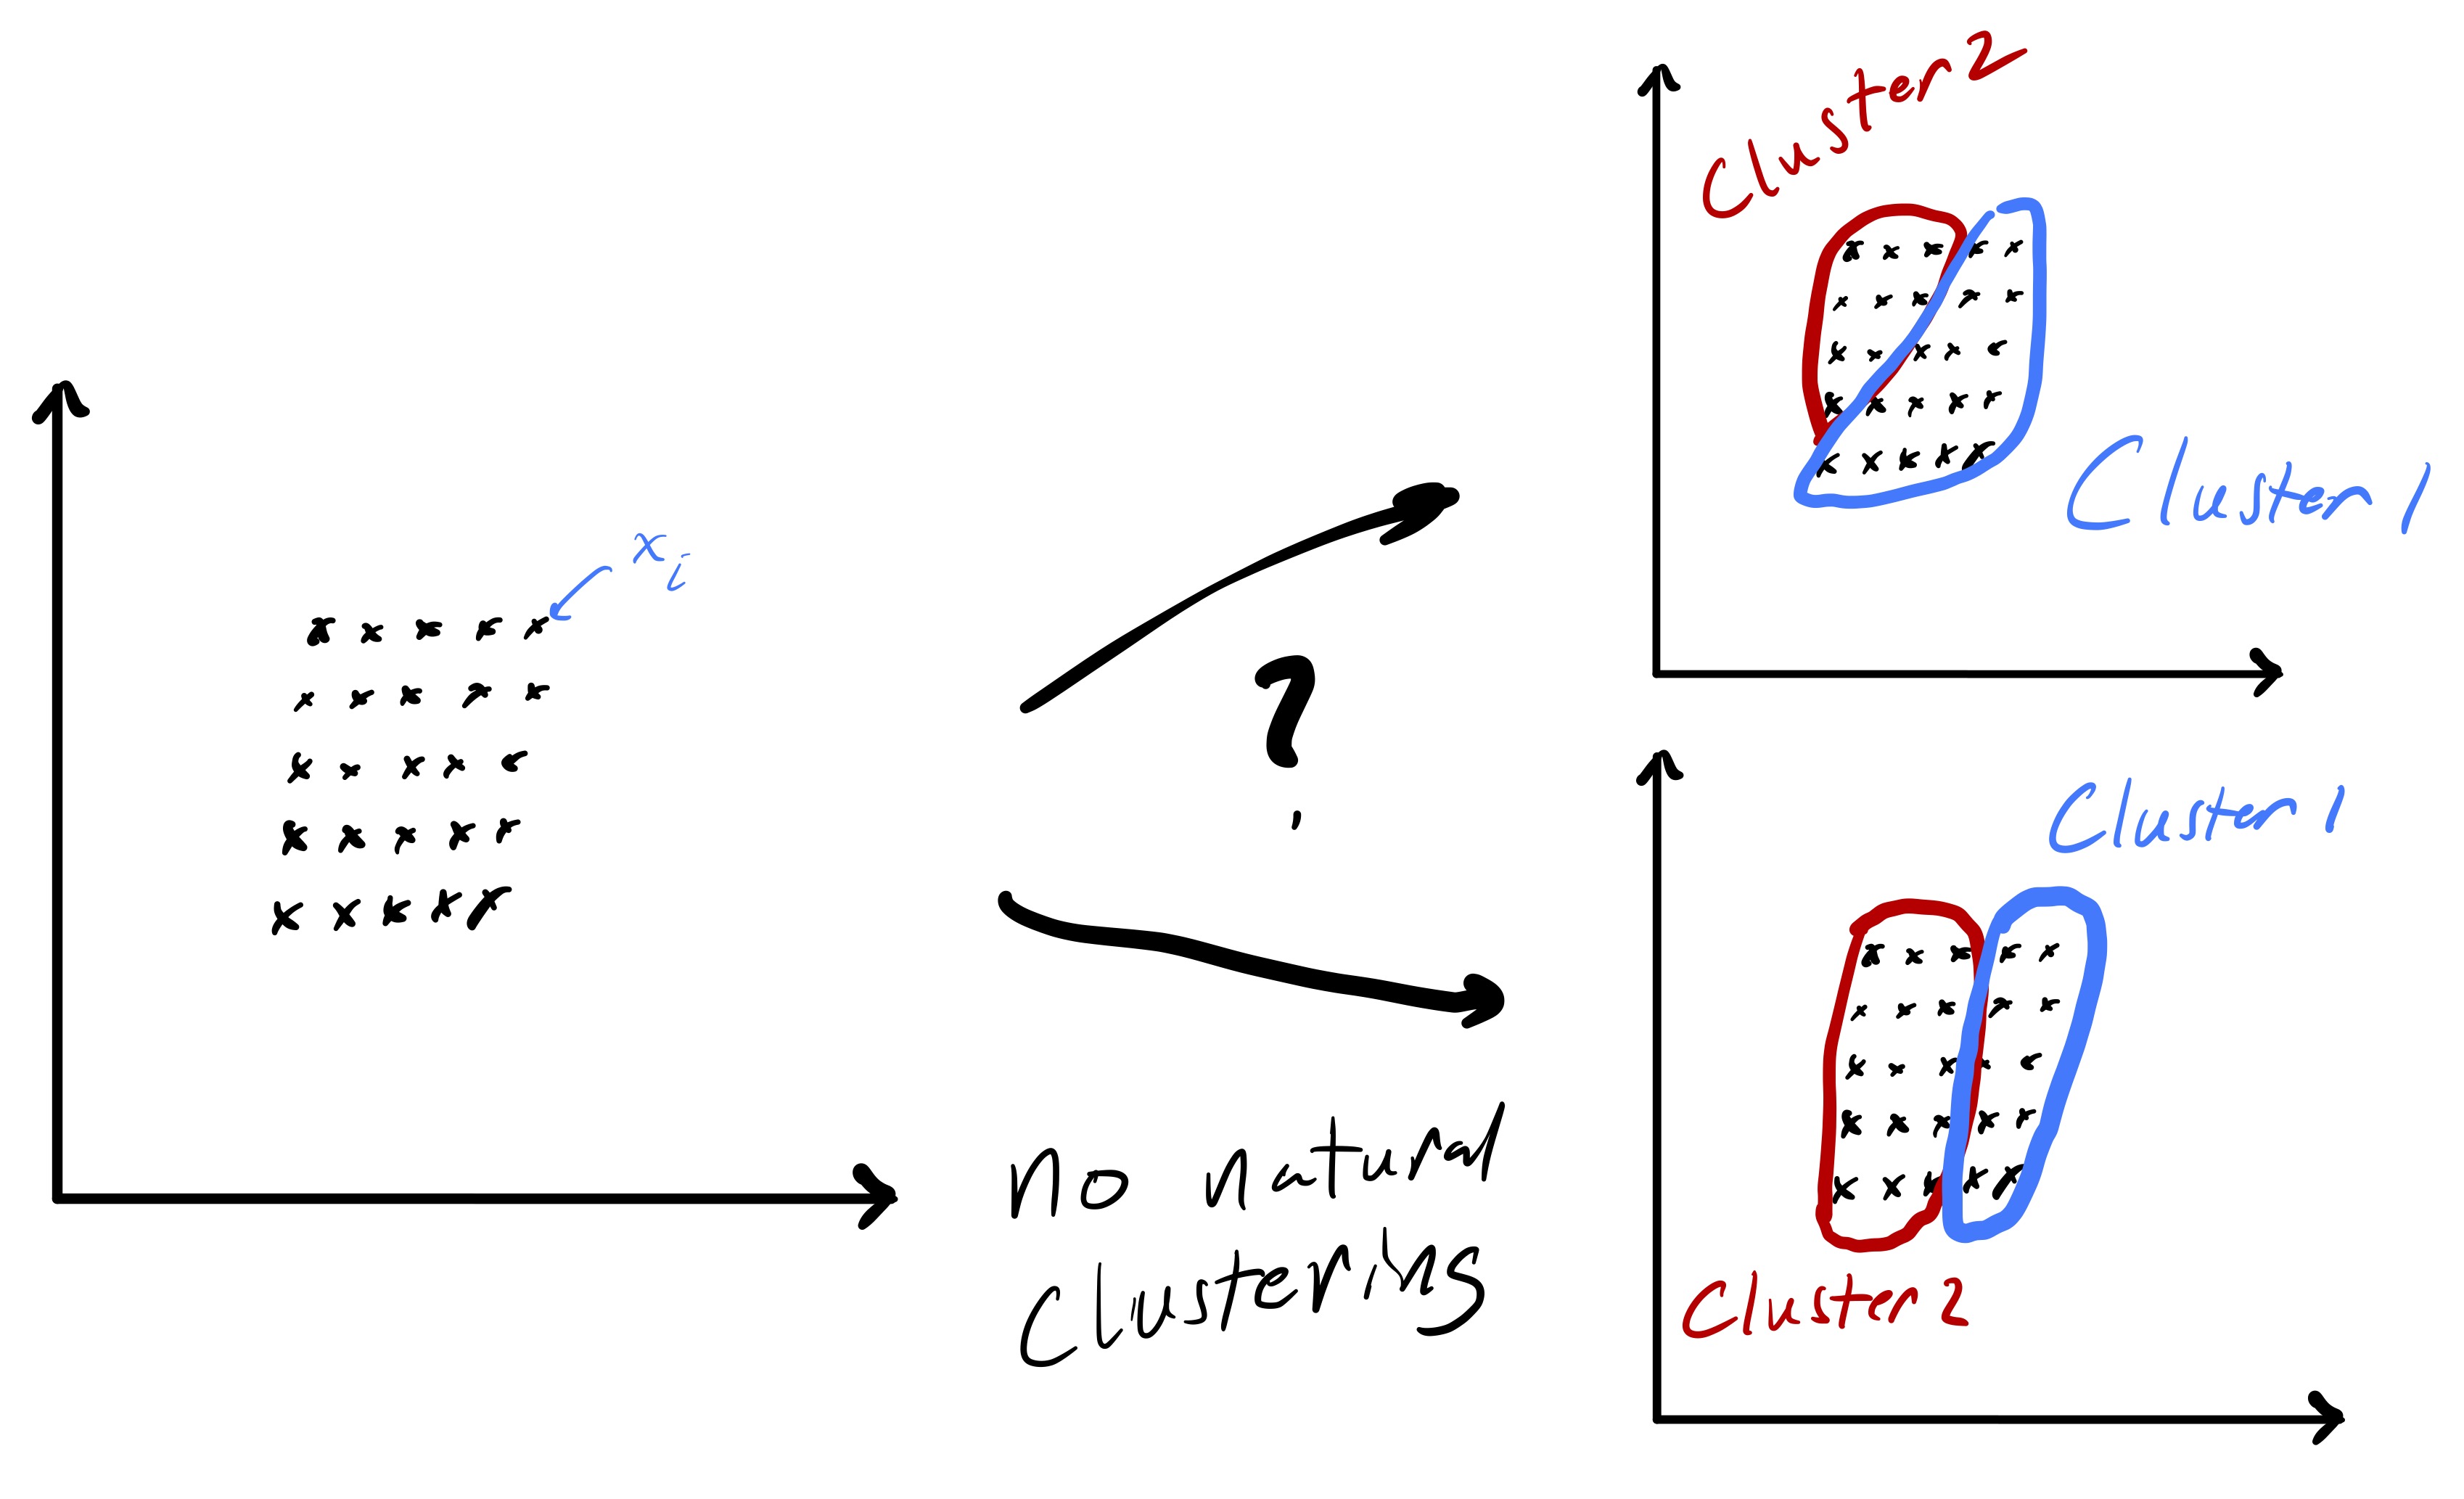 Figure 2: An example where clustering based on euclidean distance seems ill-conceived.